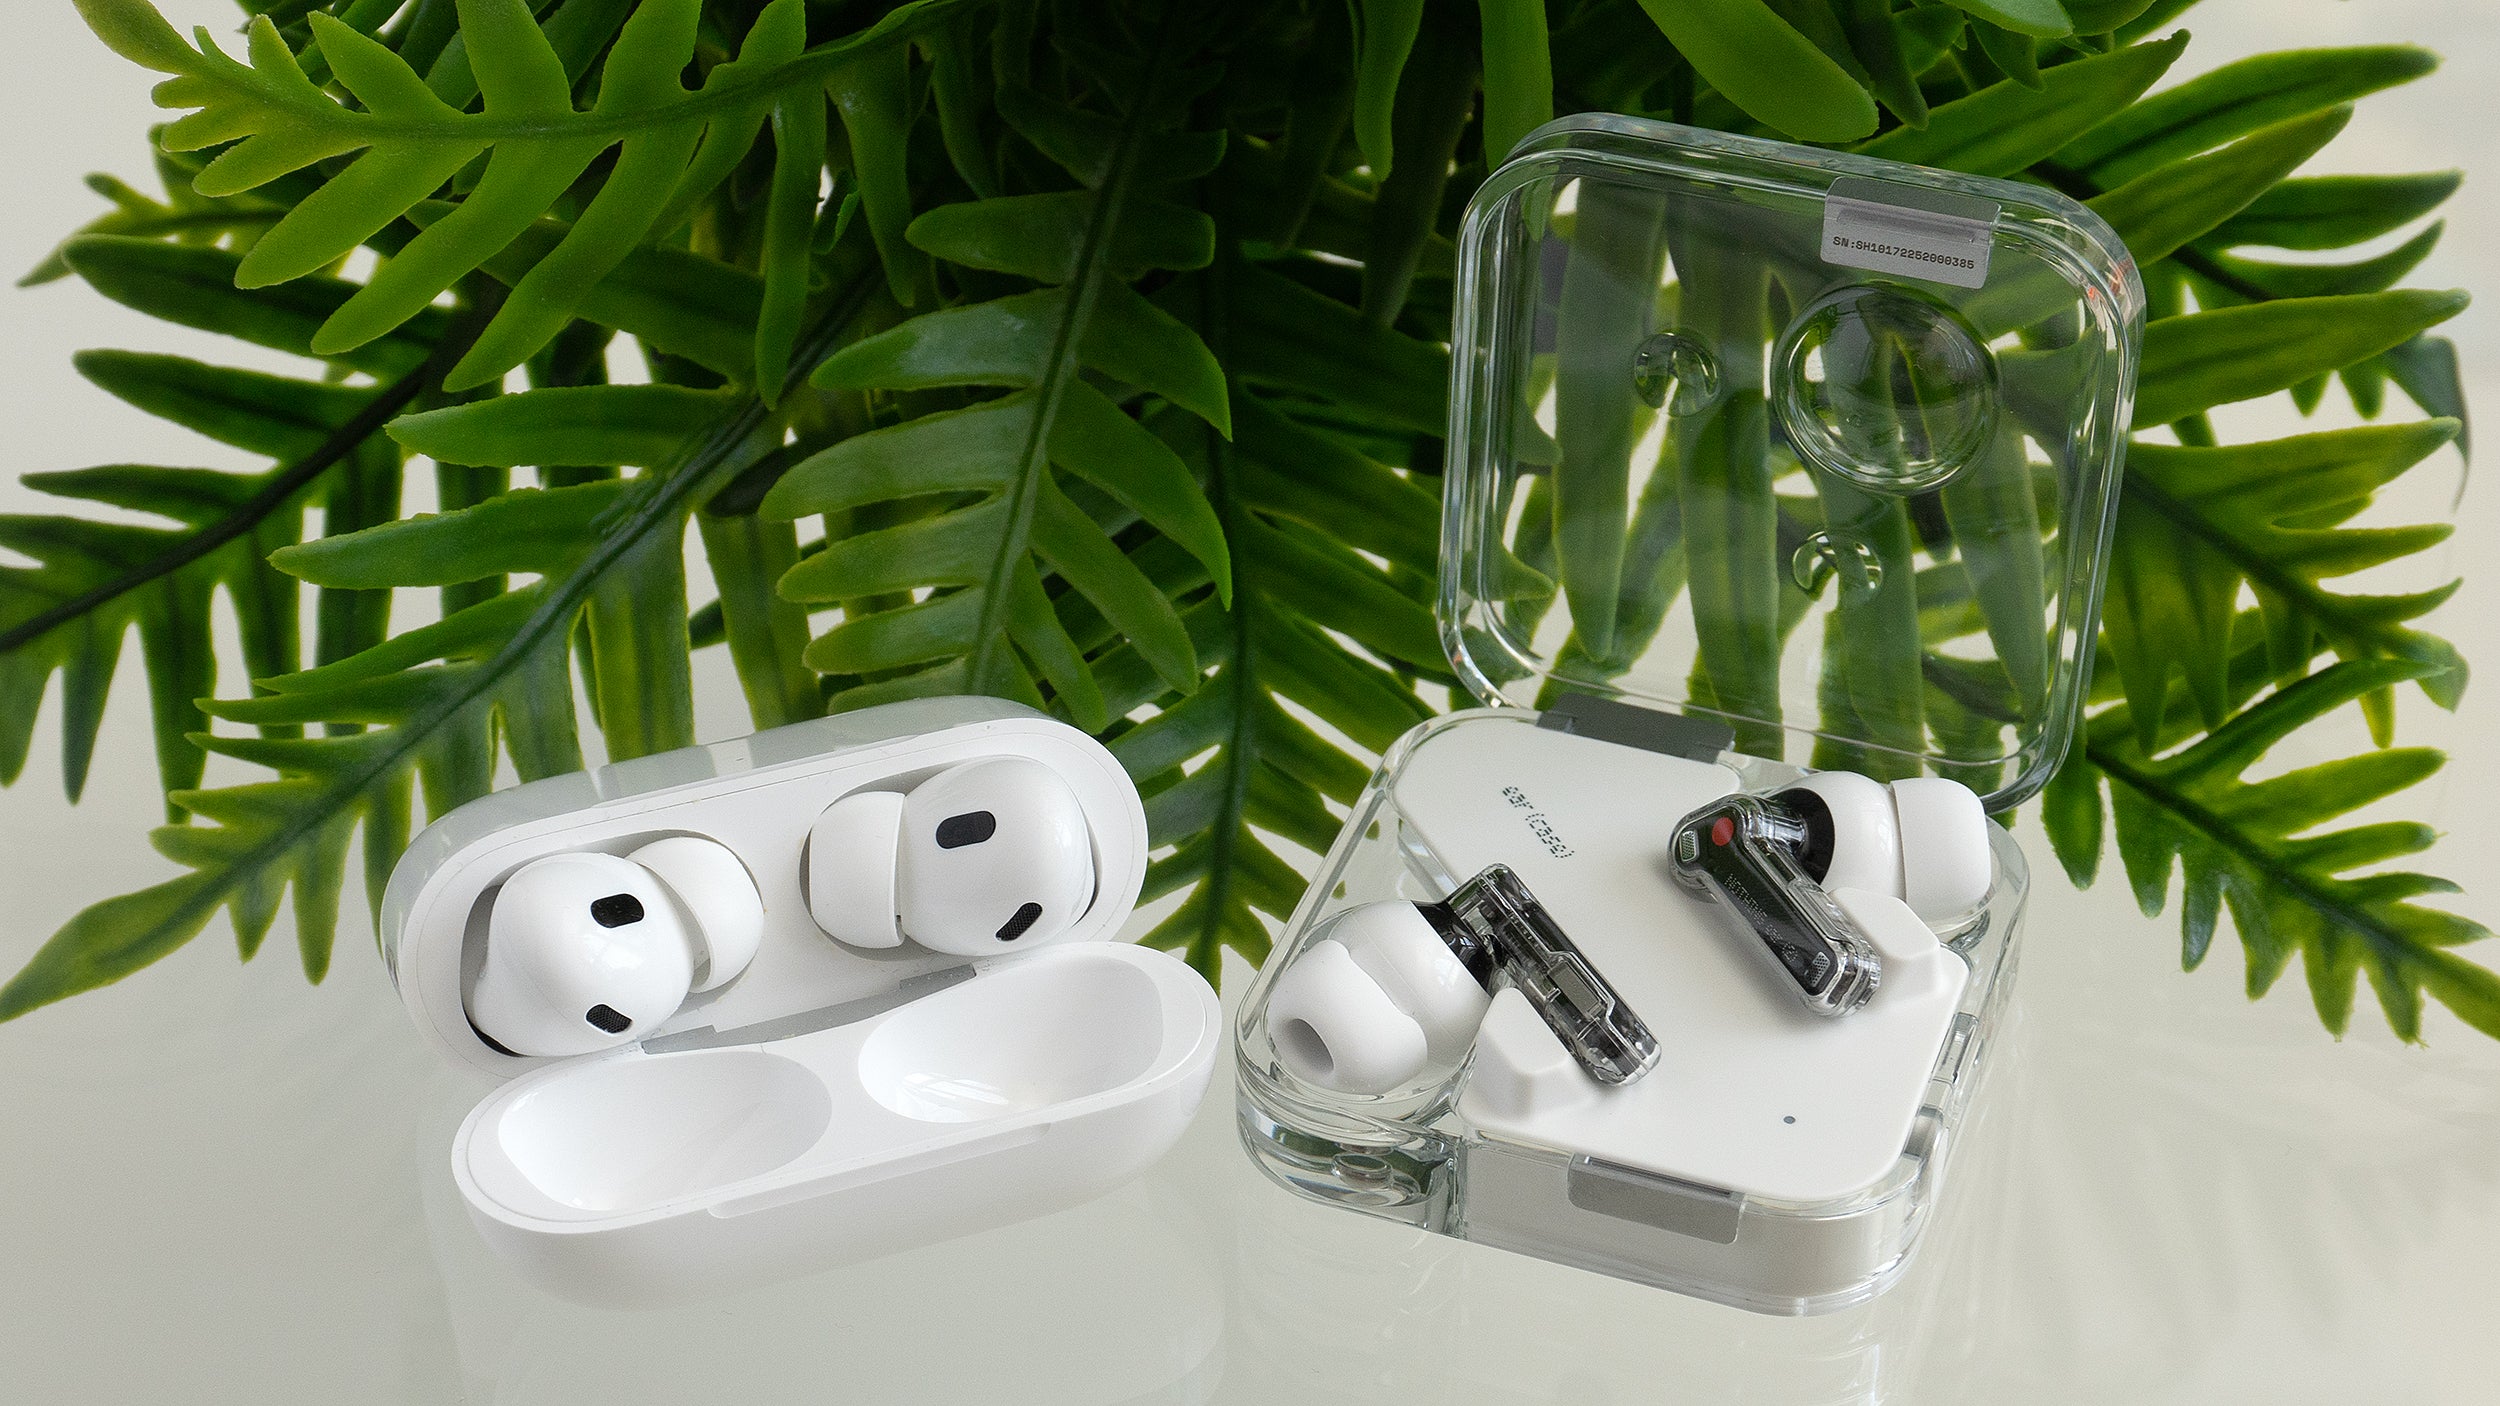 The Nothing Ear (2) (right) sound closer to the Apple AirPods Pro 2 (left) but their ANC performance is starting to fall behind. (Photo: Andrew Liszewski | Gizmodo)